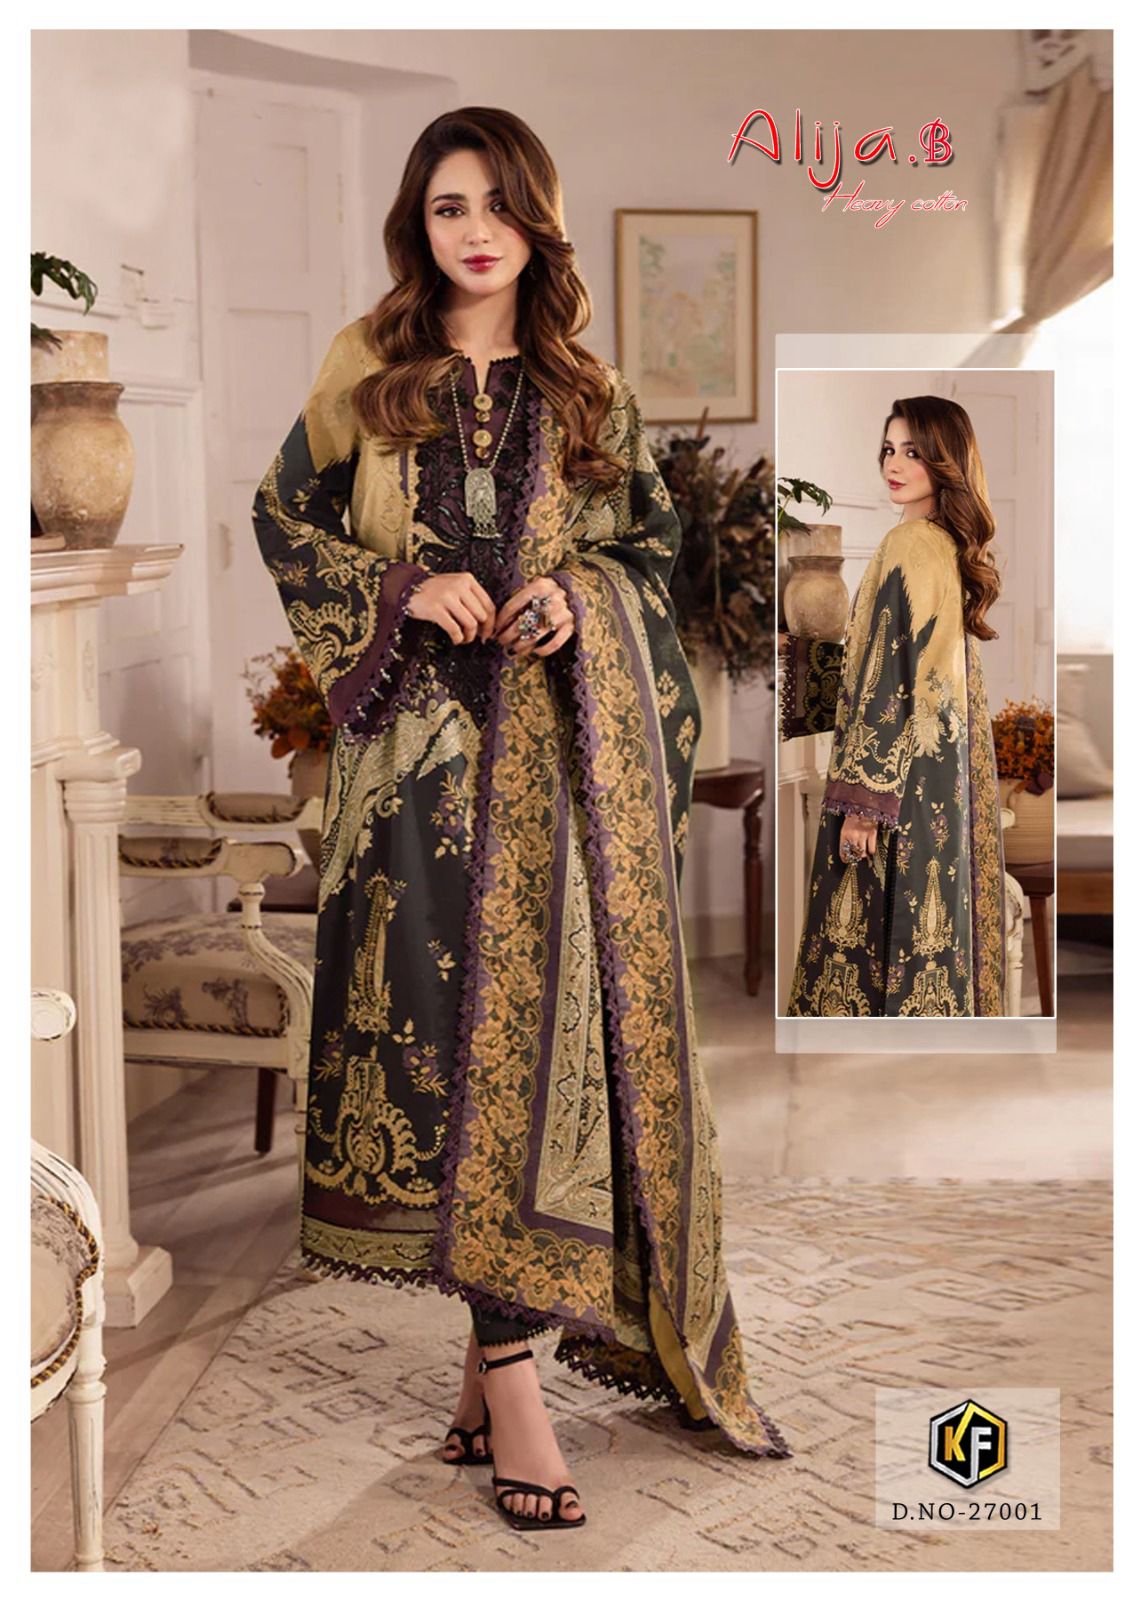 Keval Alija B Heavy Cotton Luxury Collection collection 5